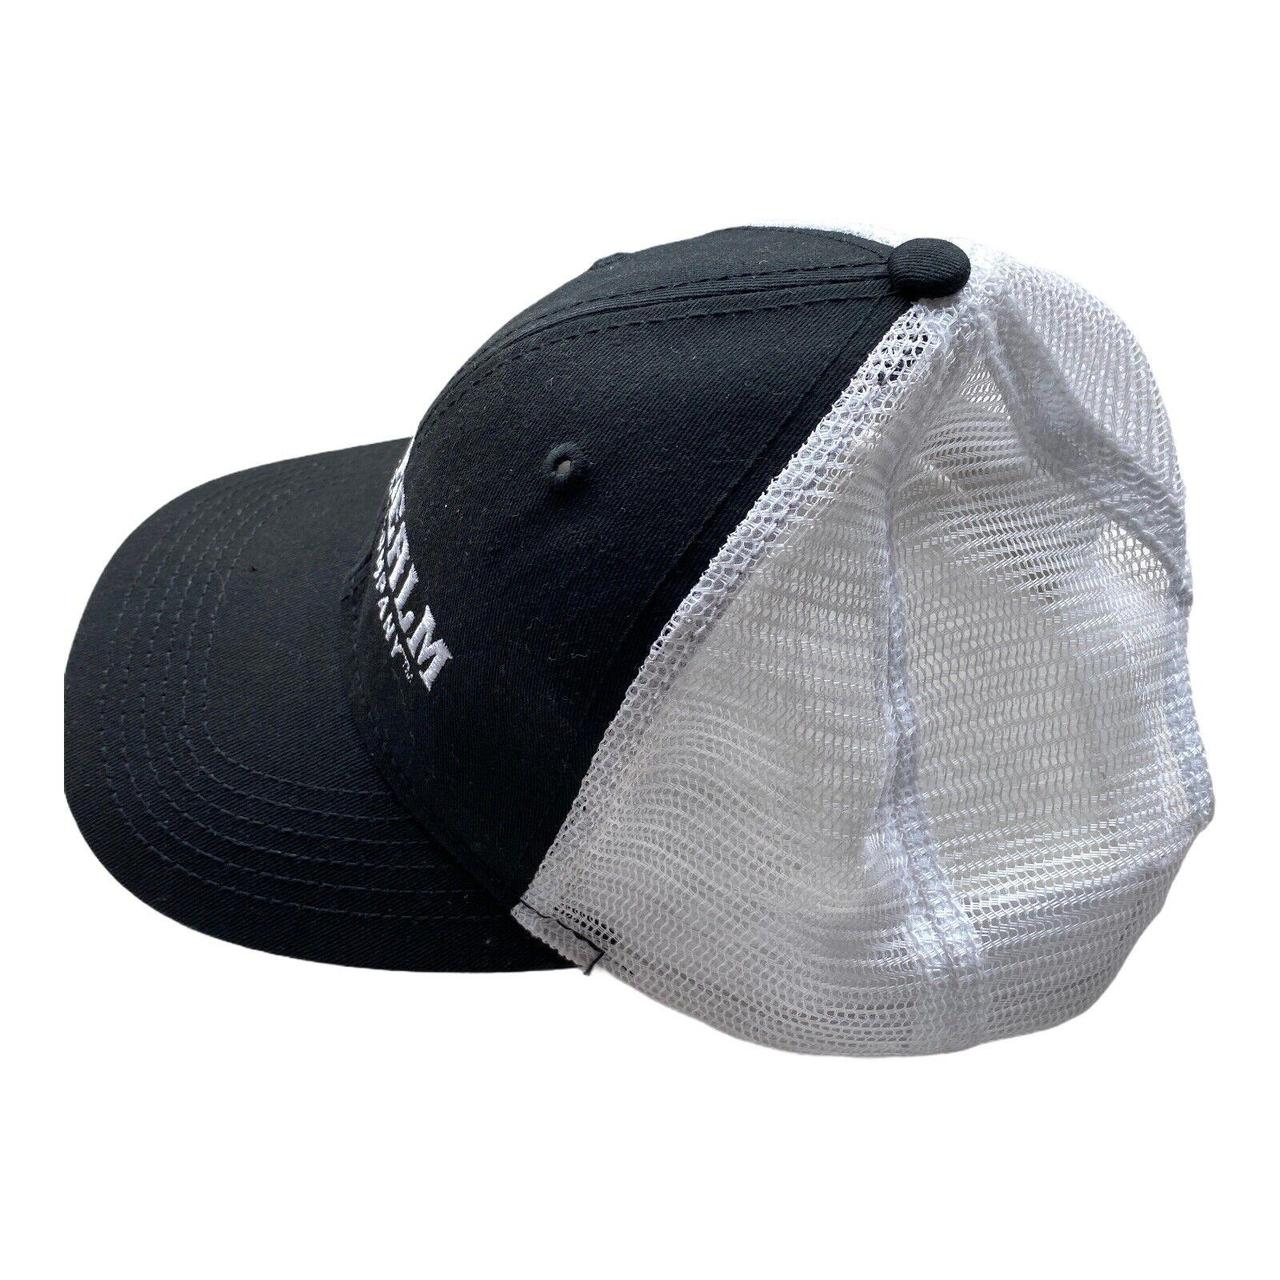 Product Image 2 - New Realm Brewing Company Hat